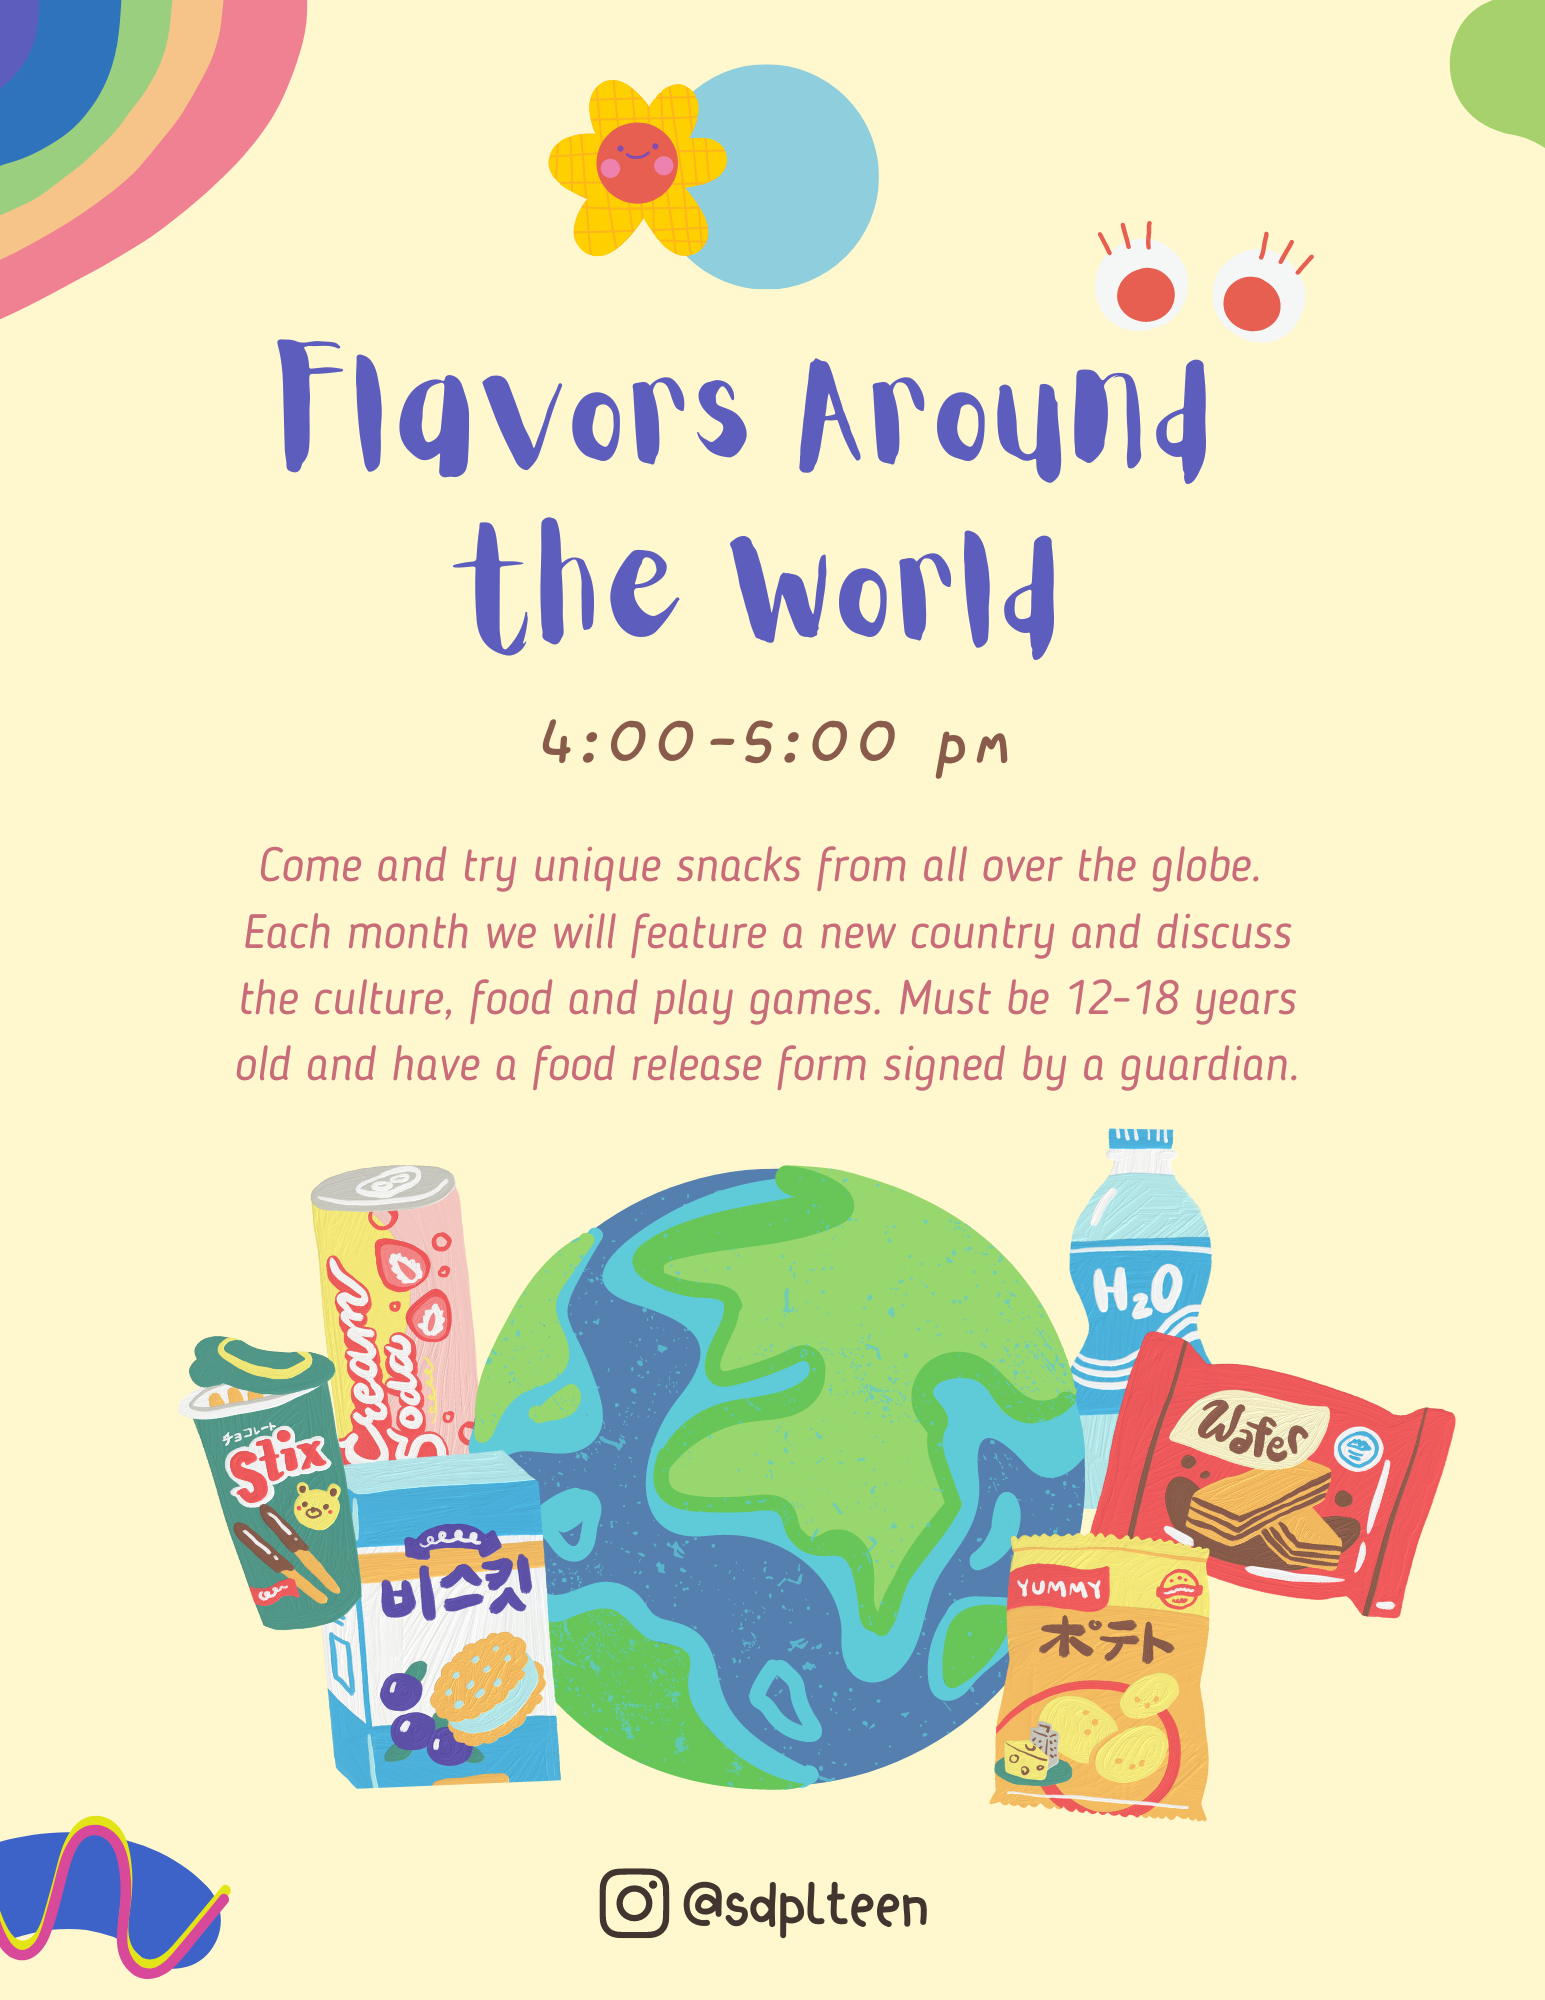 Flavors Around the World. 4-5 PM. Come and try unique snacks from all over the globe. Each  month we will feature a new country and discuss the culture, food and play games. Must be 12-18 years old and have a food release form signed by a guardian.